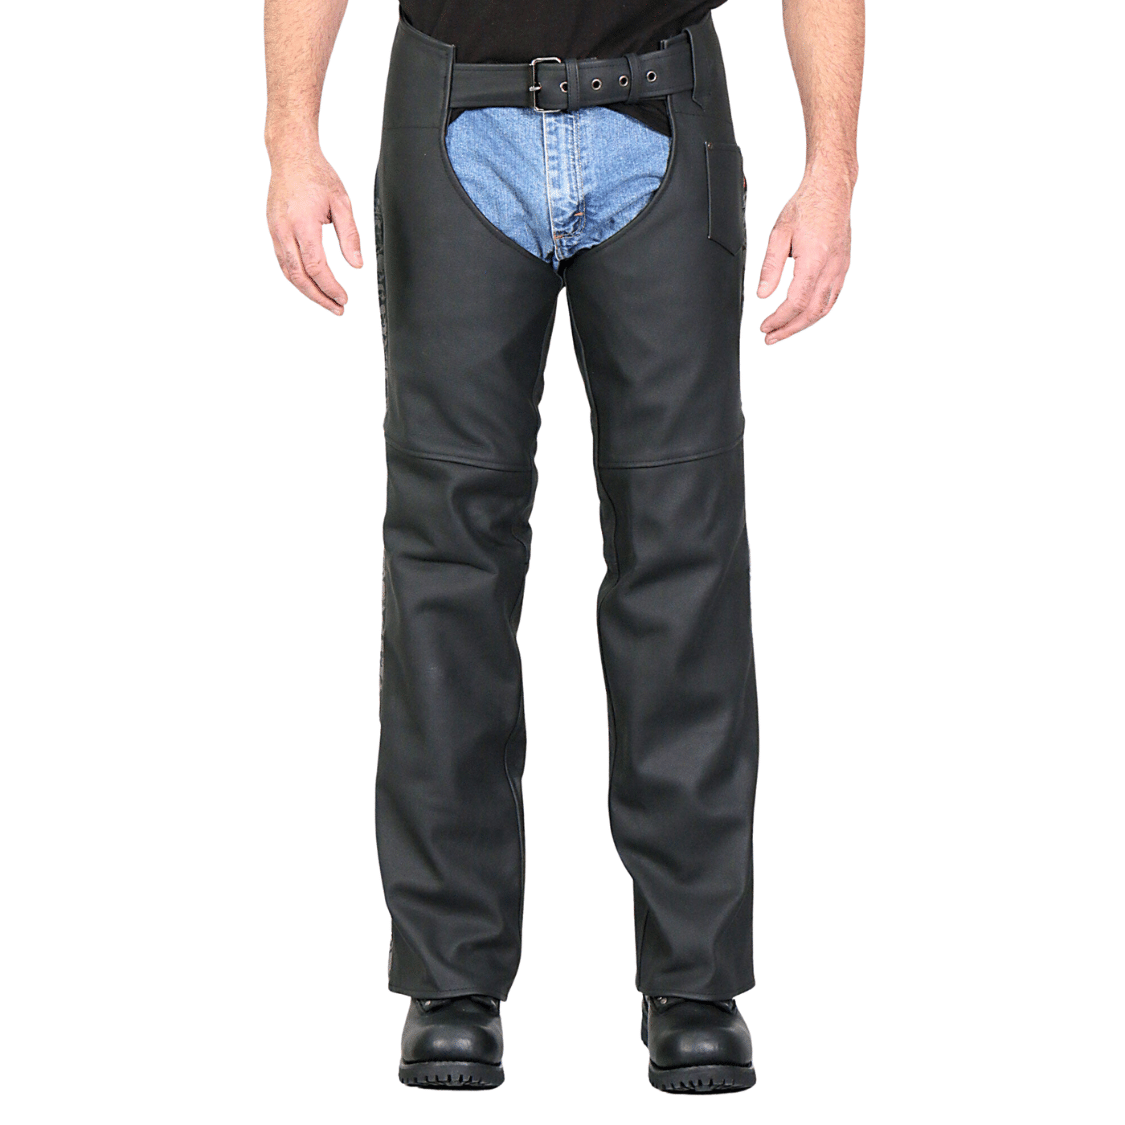 Black Leather Motorcycle Chaps - High Quality Protection - Leather ...